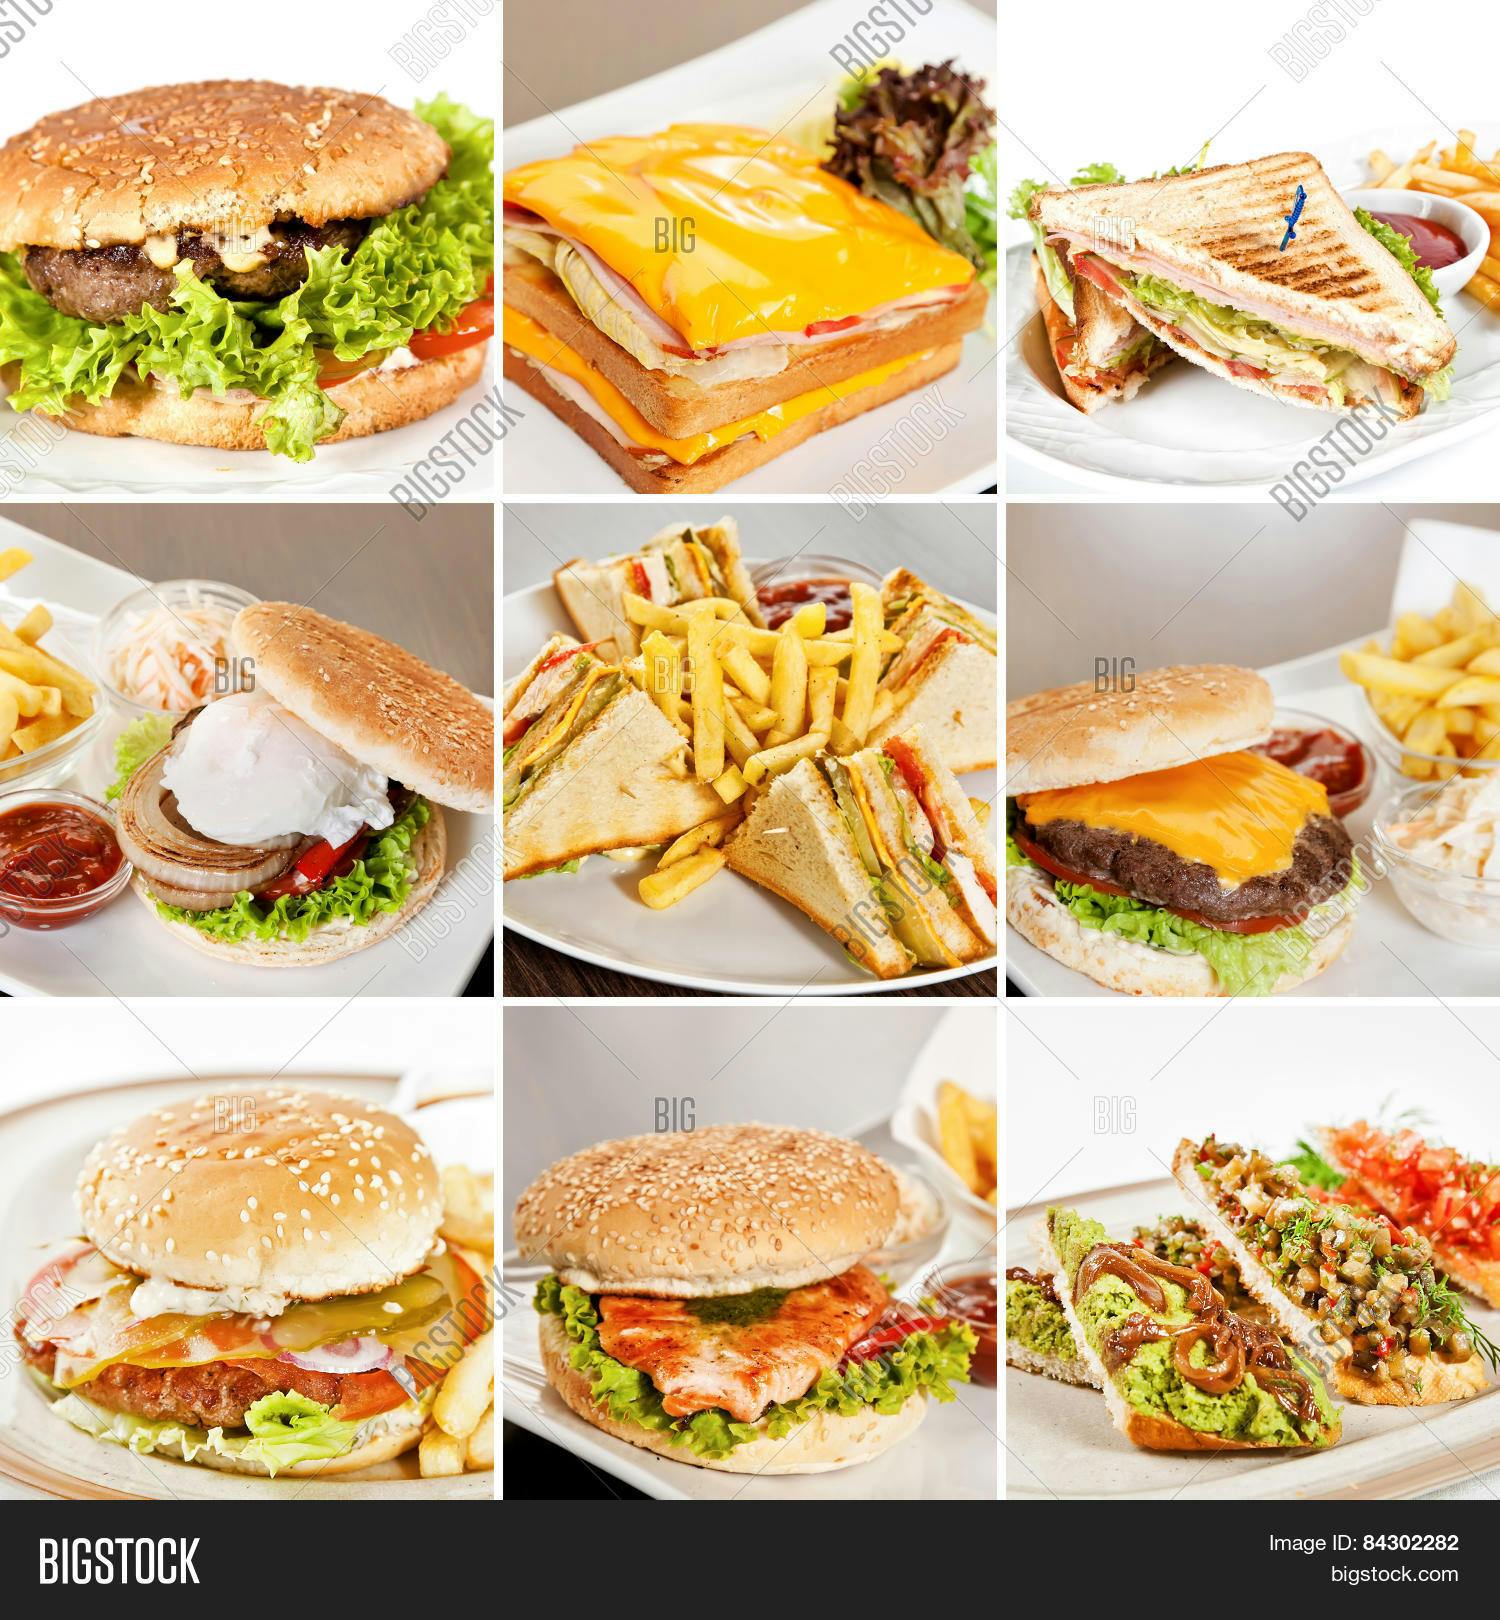 Burger and Sandwiches